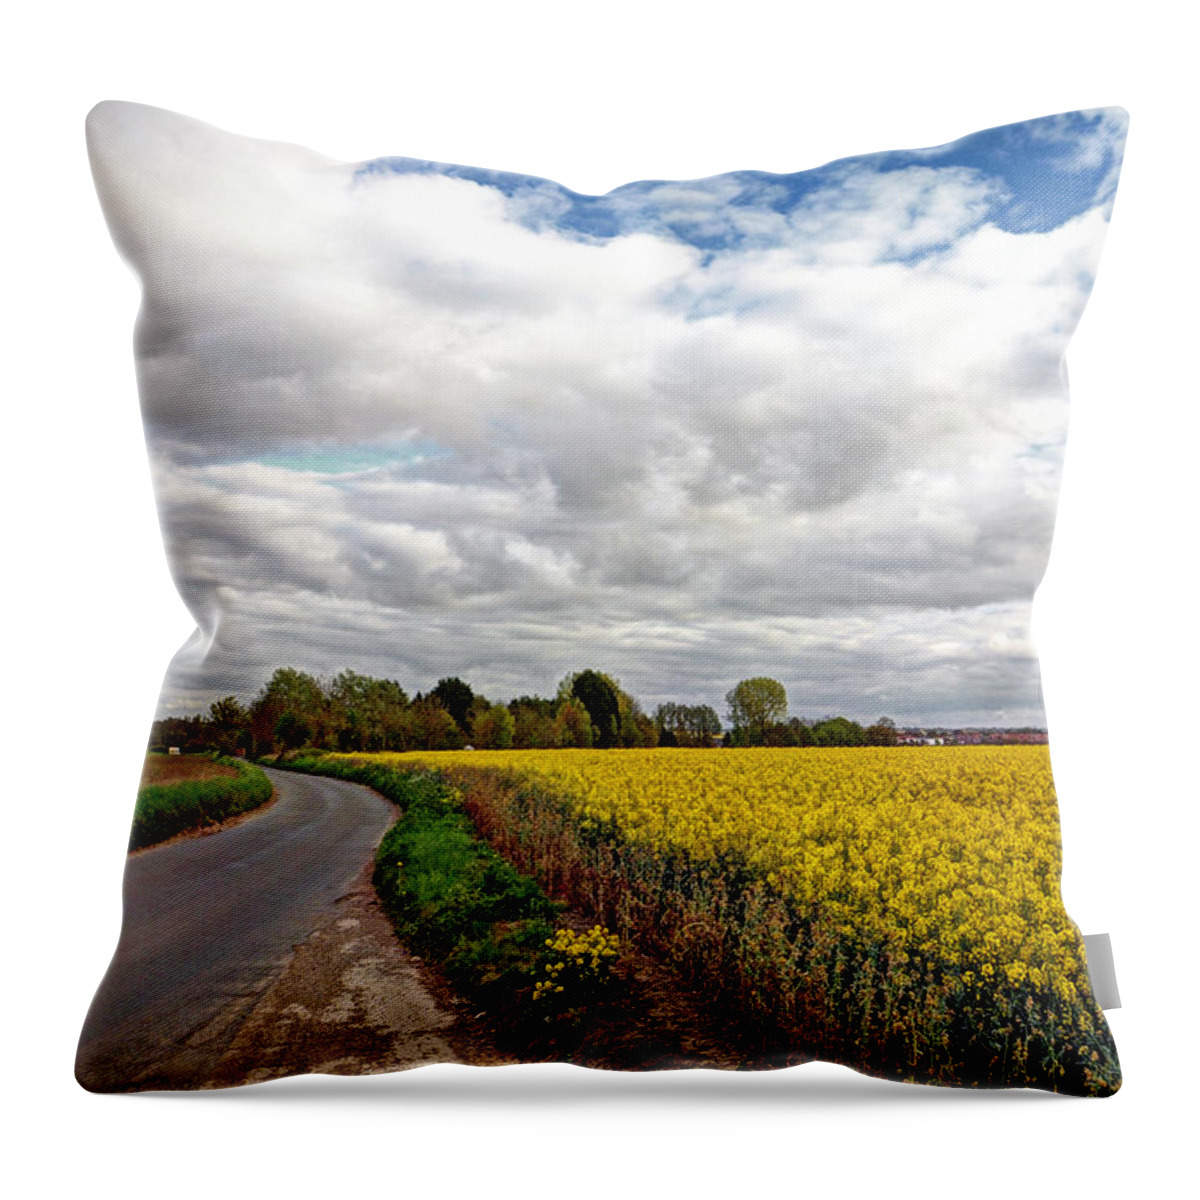 Farm Landscape Throw Pillow featuring the photograph Colorful Backroads - Rapeseed Fields by Gill Billington